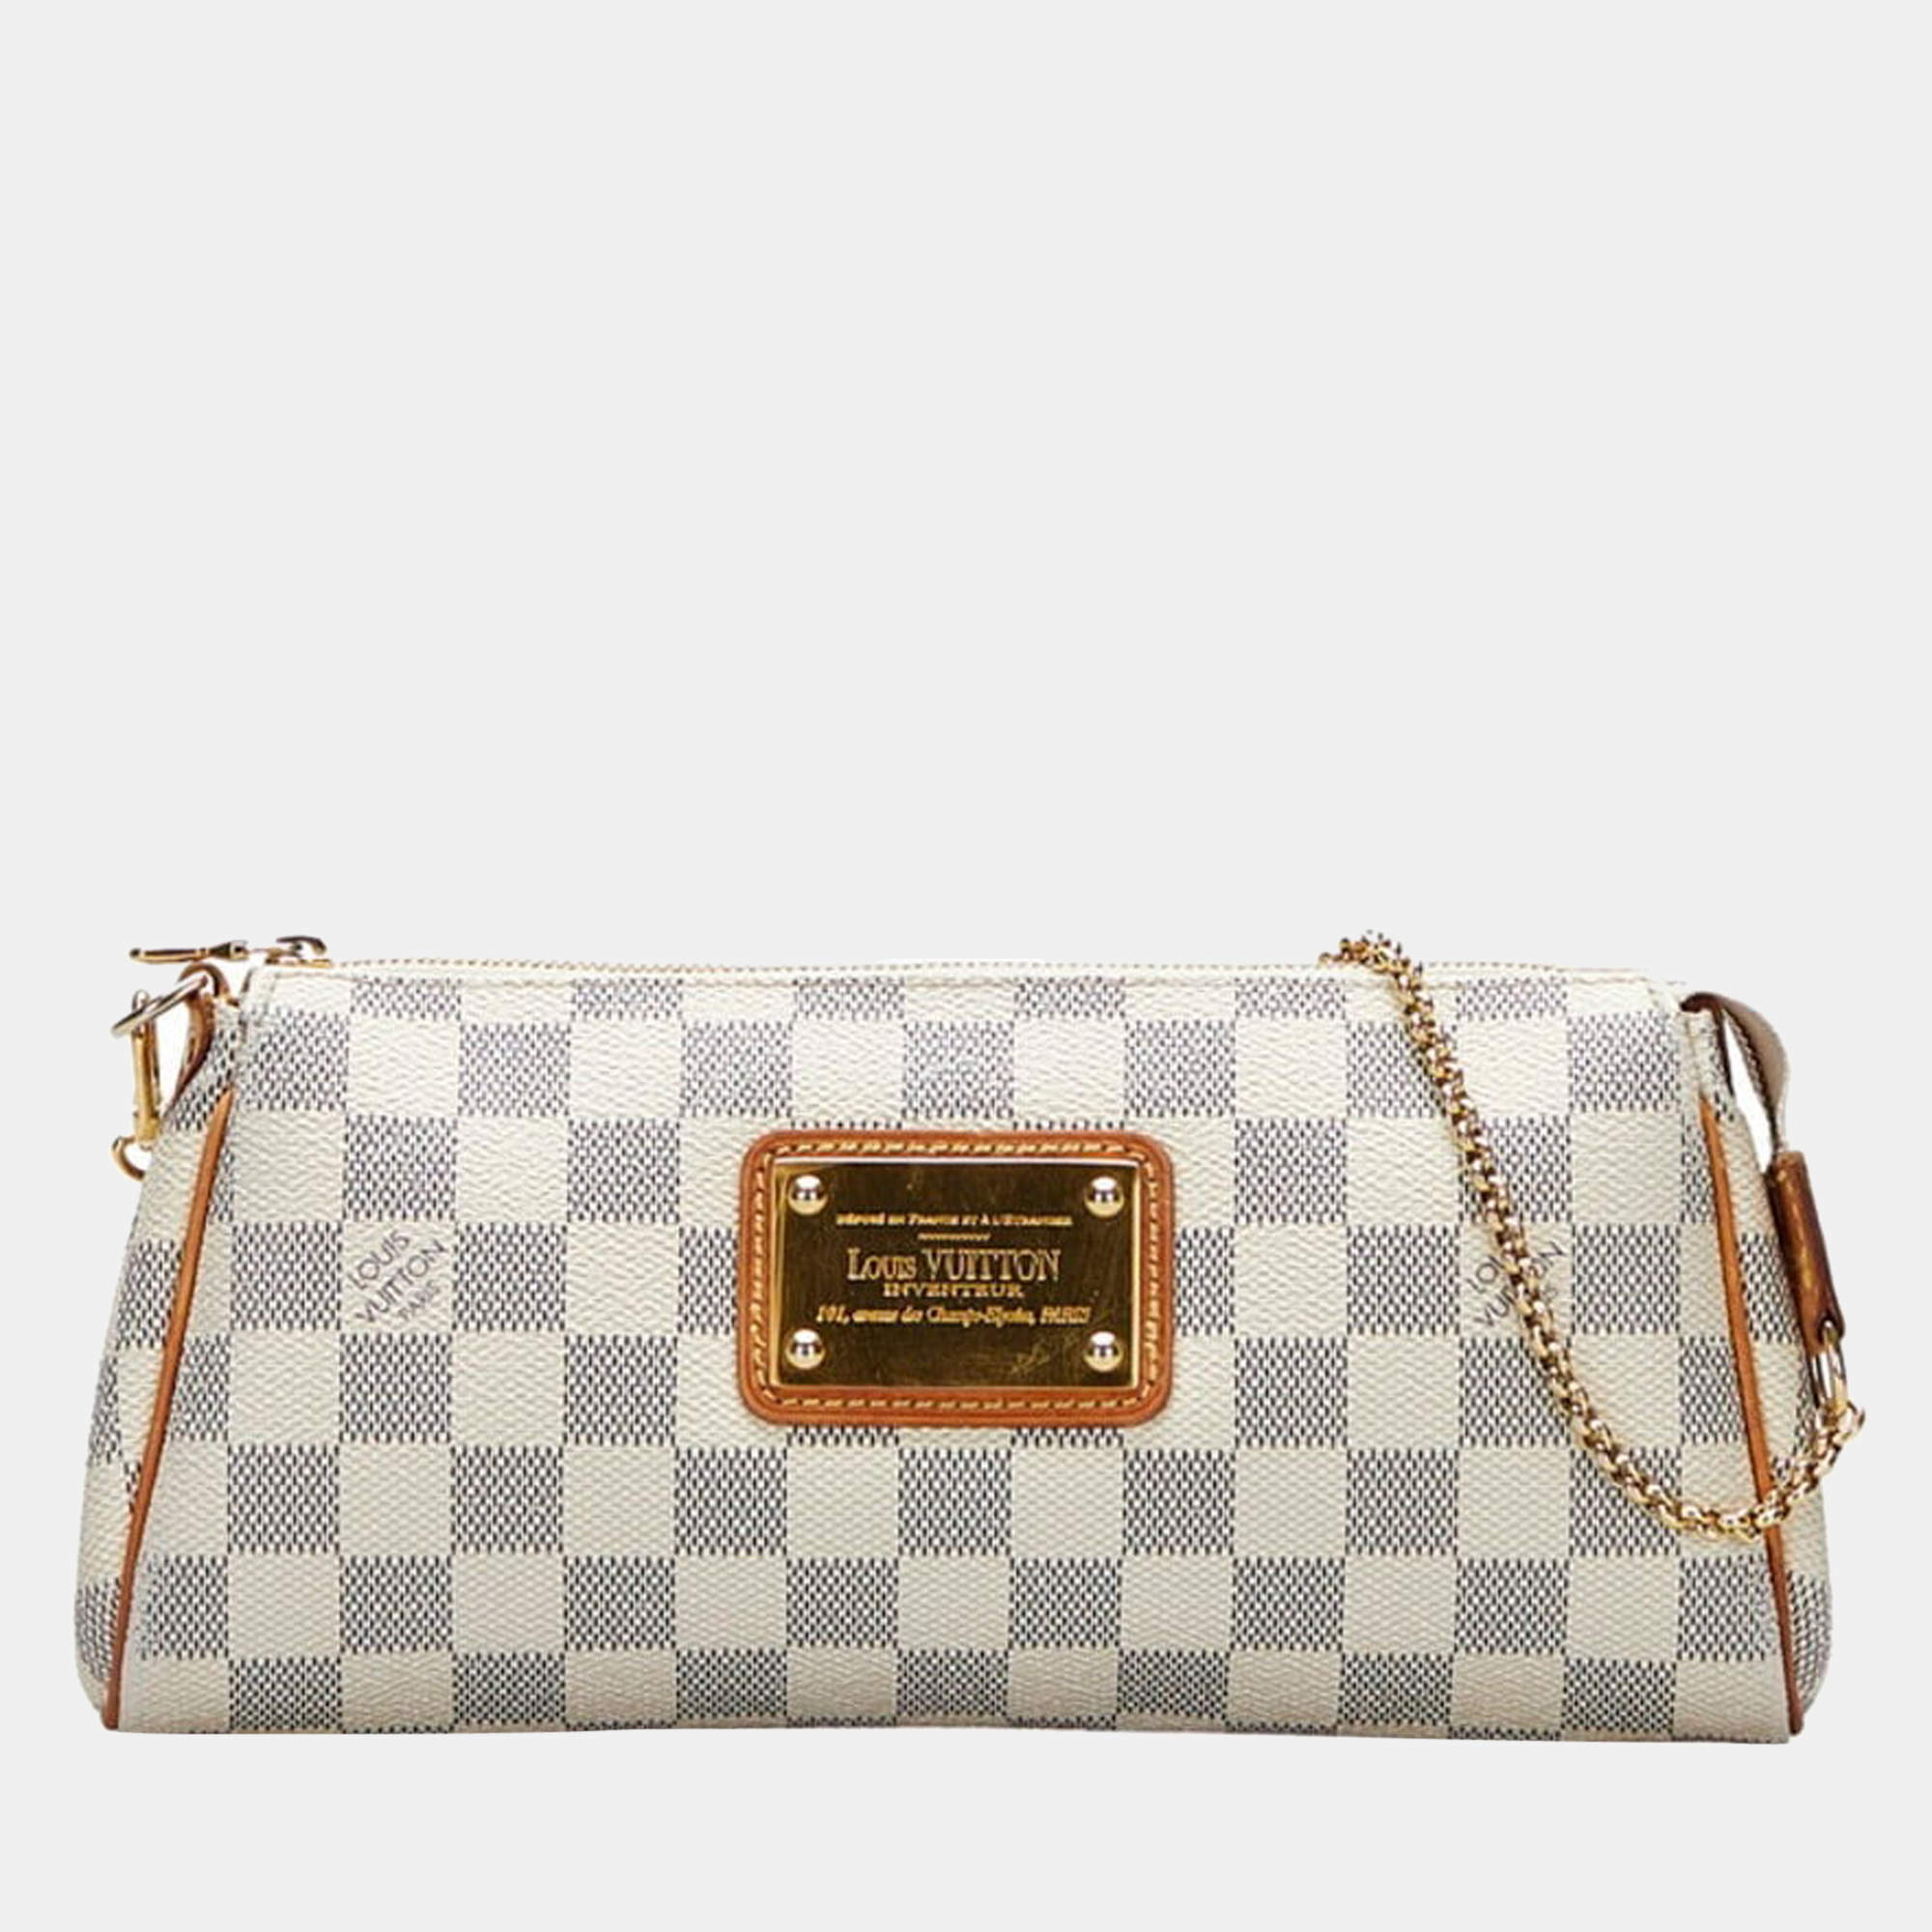 Louis Vuitton Damier Eva Purse With Gold Short Chain And Leather